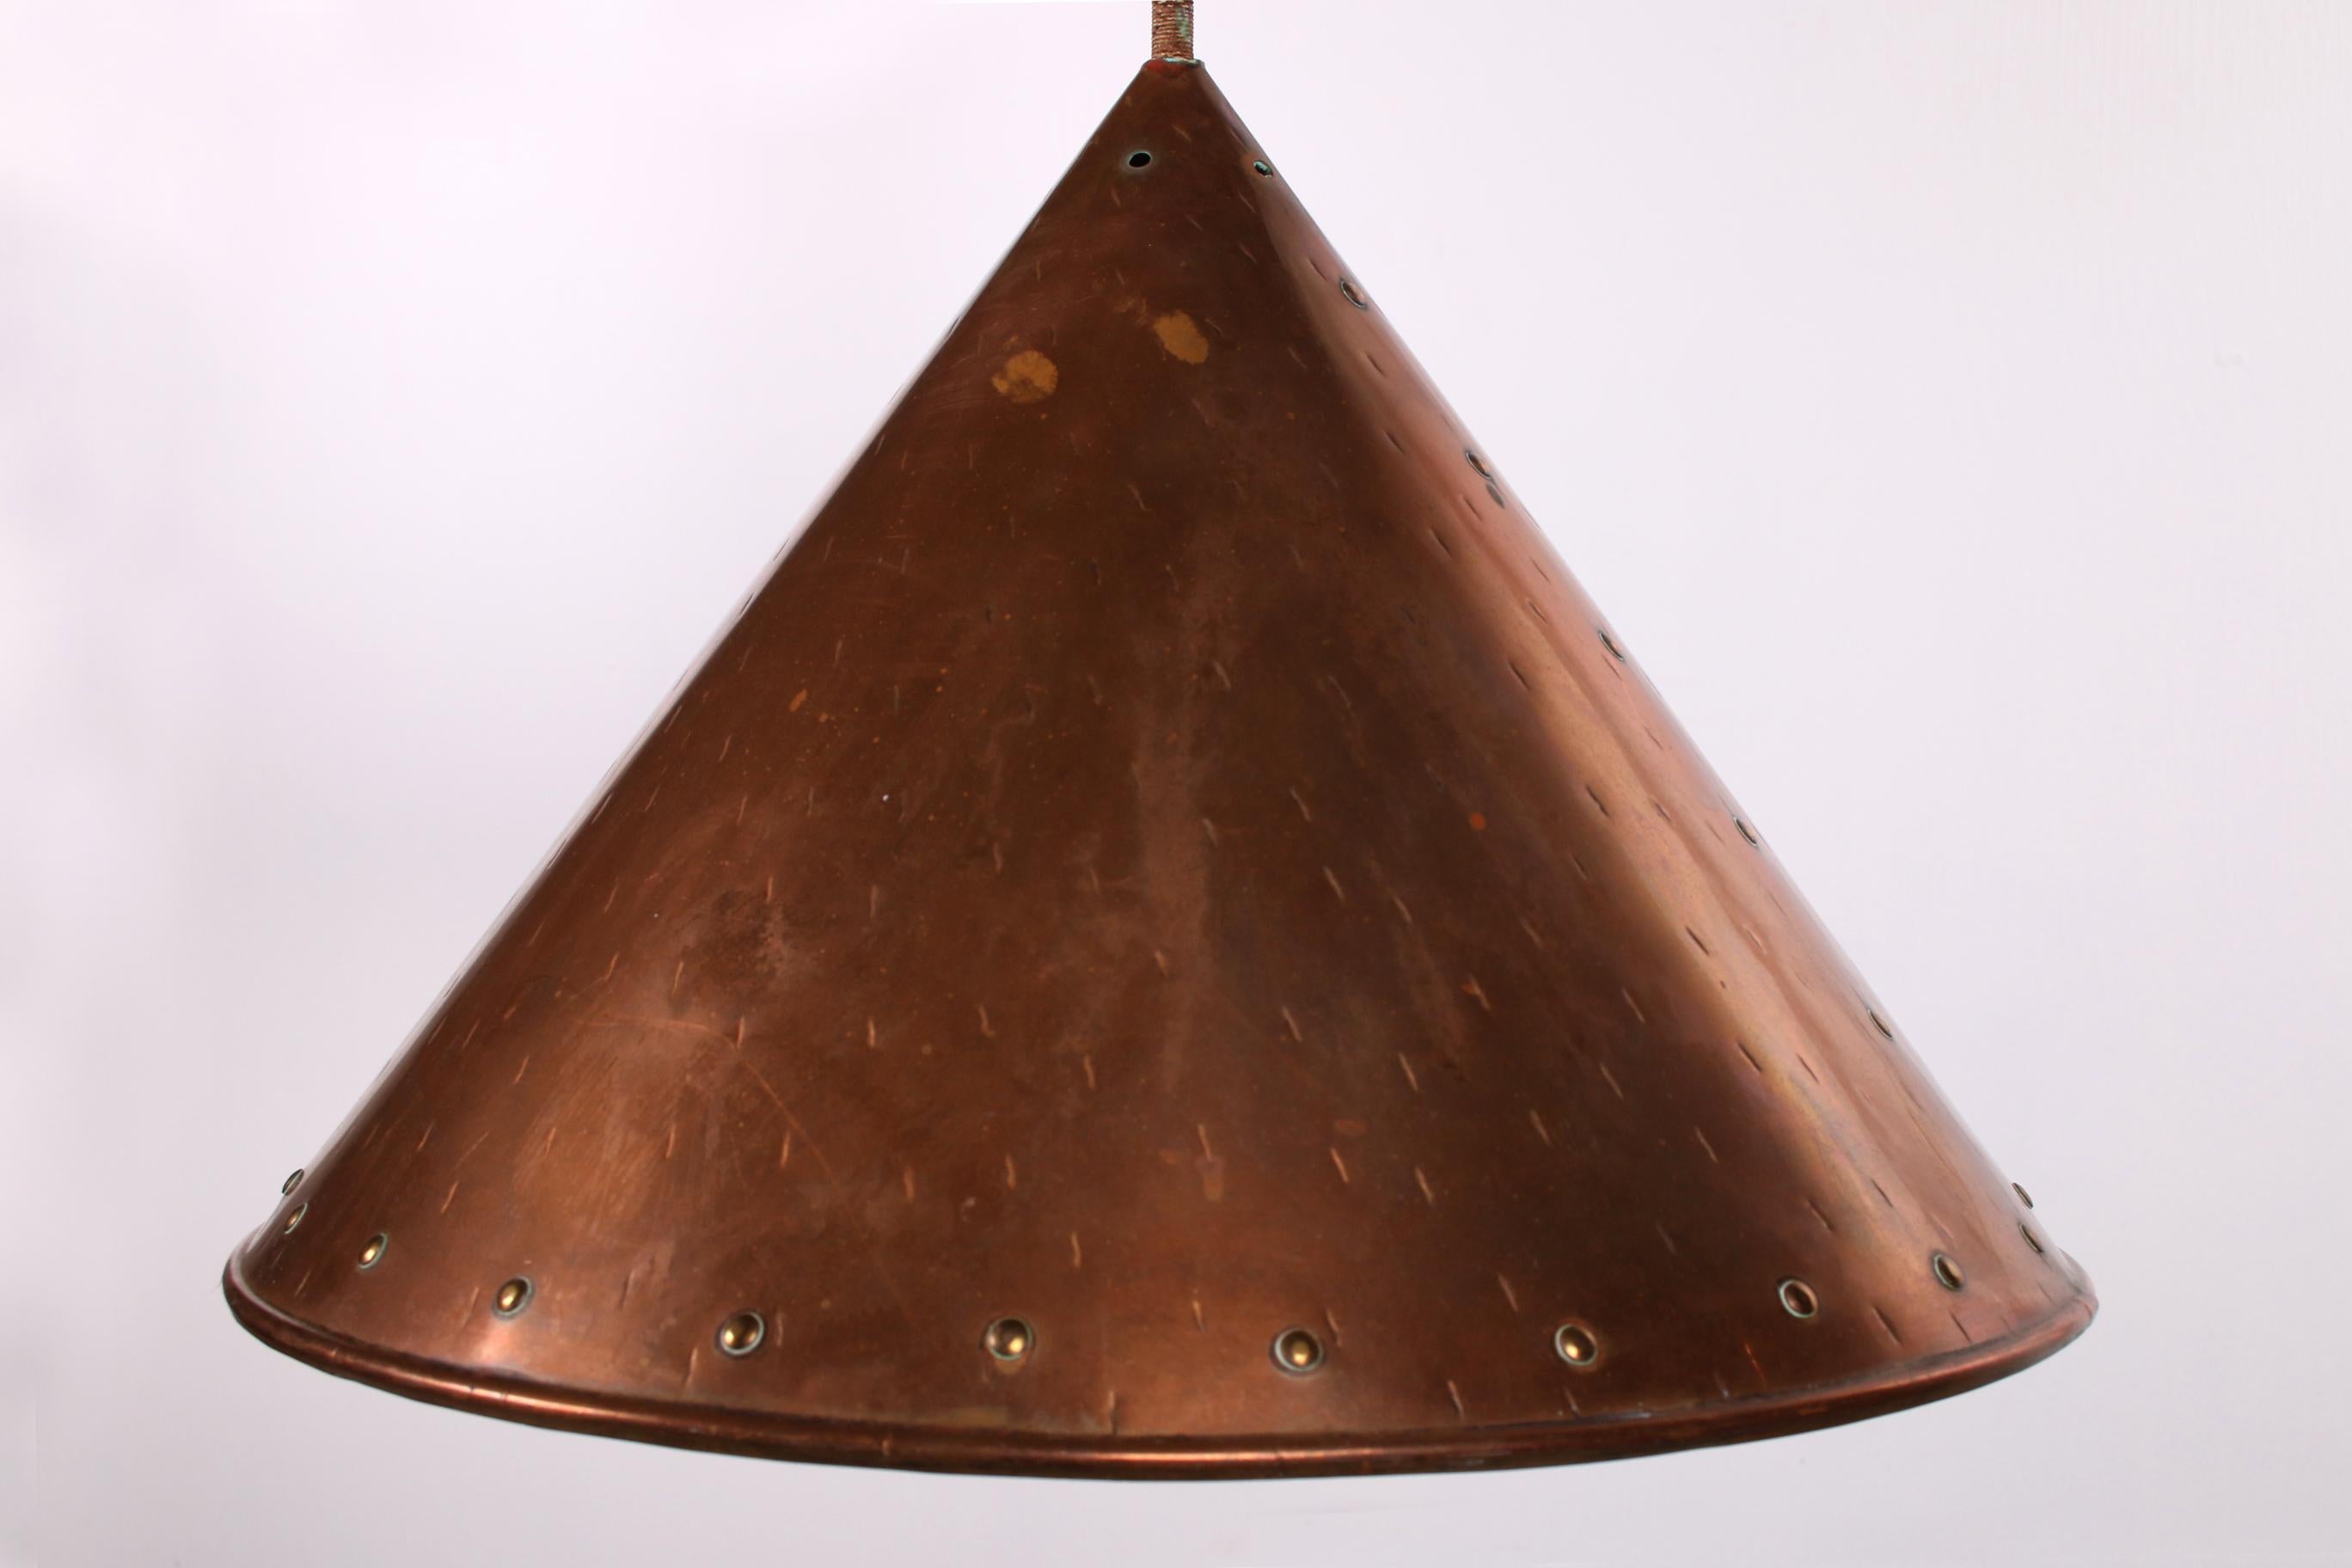 Danish hanging lamp, 
this lamp is hand hammered copper from ES Horn Aalestrup. 
Hand-beaten copper gives a craftsmanship to the pendant lamp. 
The cable is '' hidden '' in the metal chain, which matches the rustic shape perfectly. 

Together